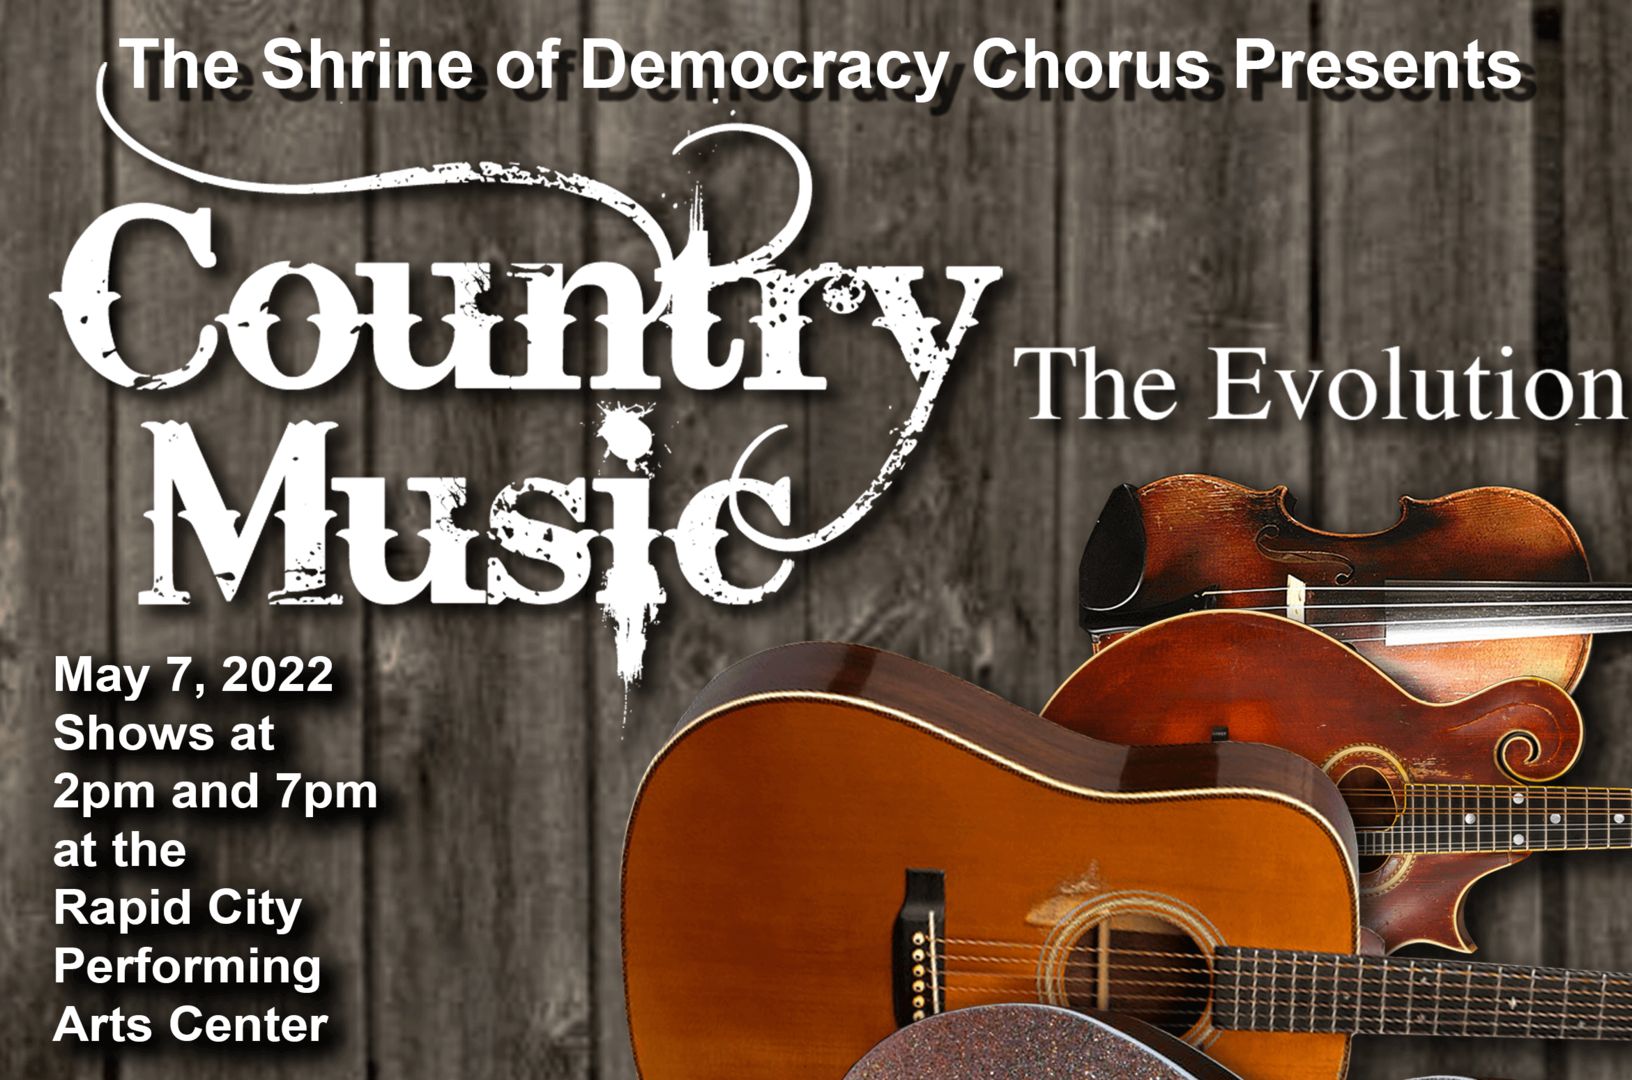 Shrine of Democracy Chorus Annual Show: Country Music - The Evolution  Saturday, May 7  2pm and 7pm, Rapid City, South Dakota, United States